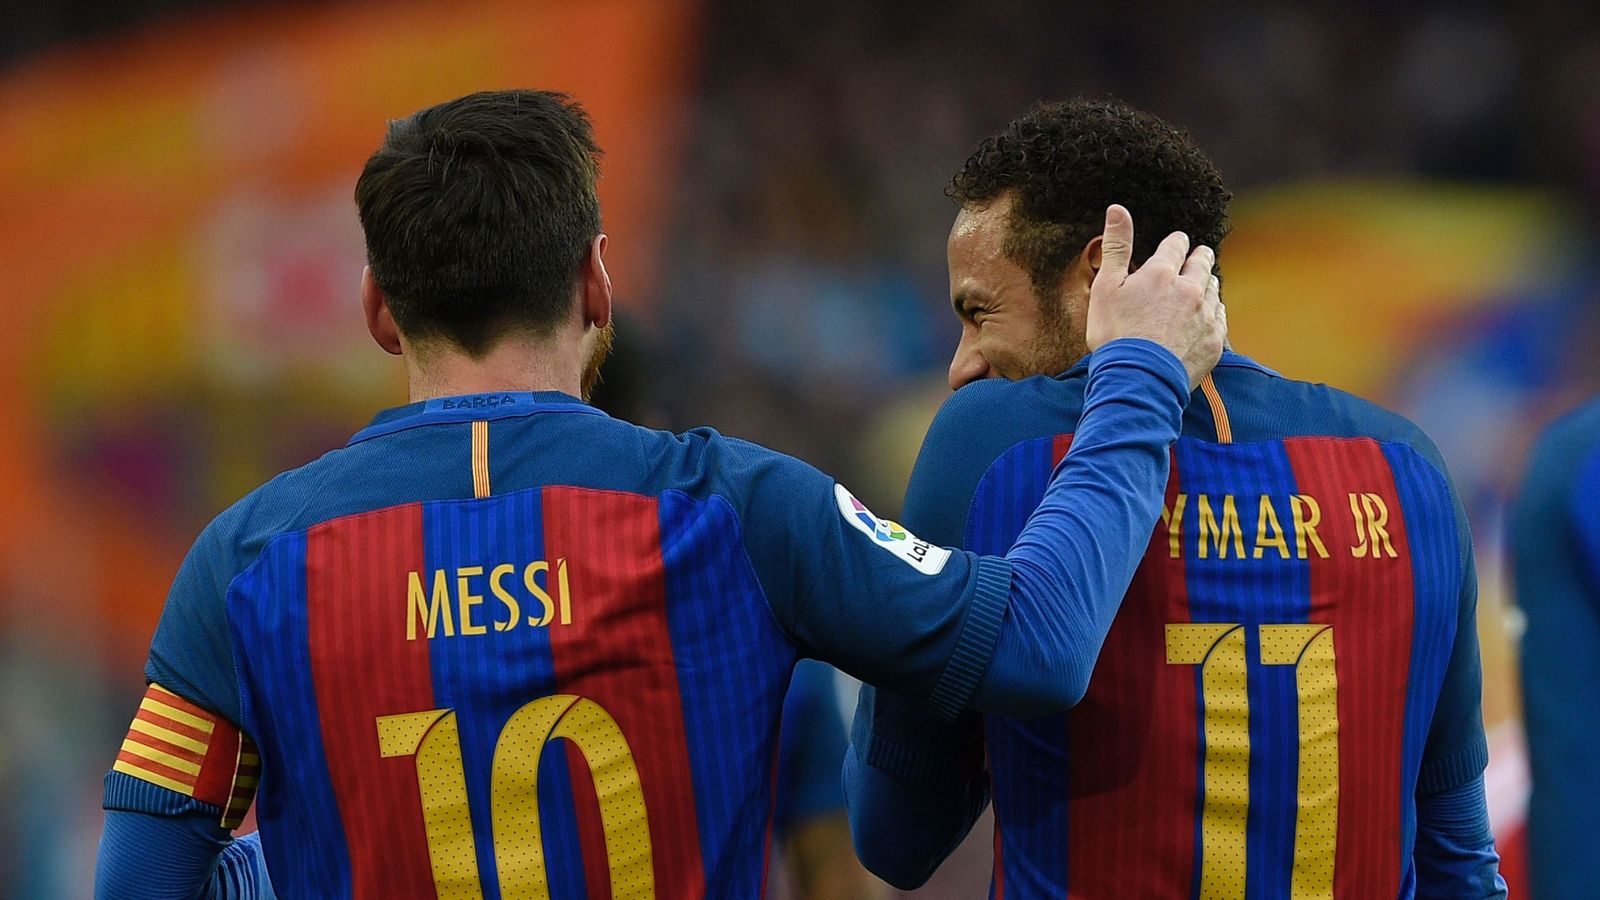 Premier League Giant Wants To Sign Both Lionel Messi And Neymar